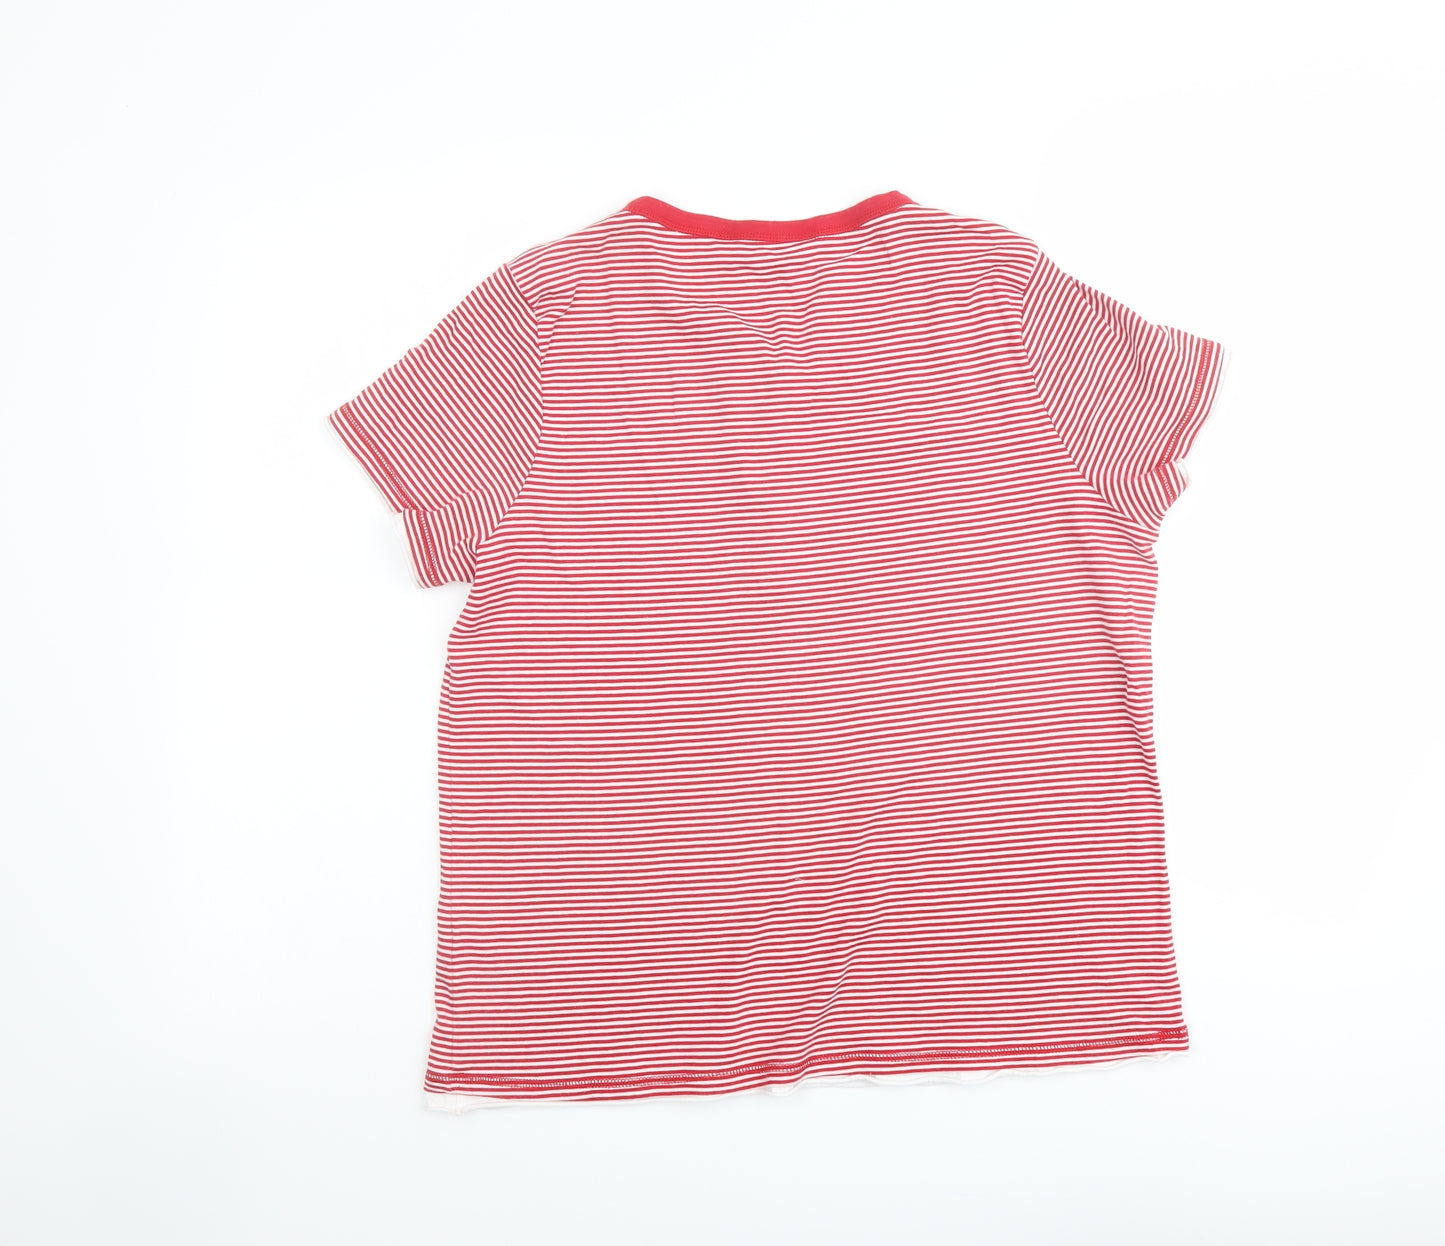 BHS Womens Red Striped Cotton Basic T-Shirt Size 20 V-Neck